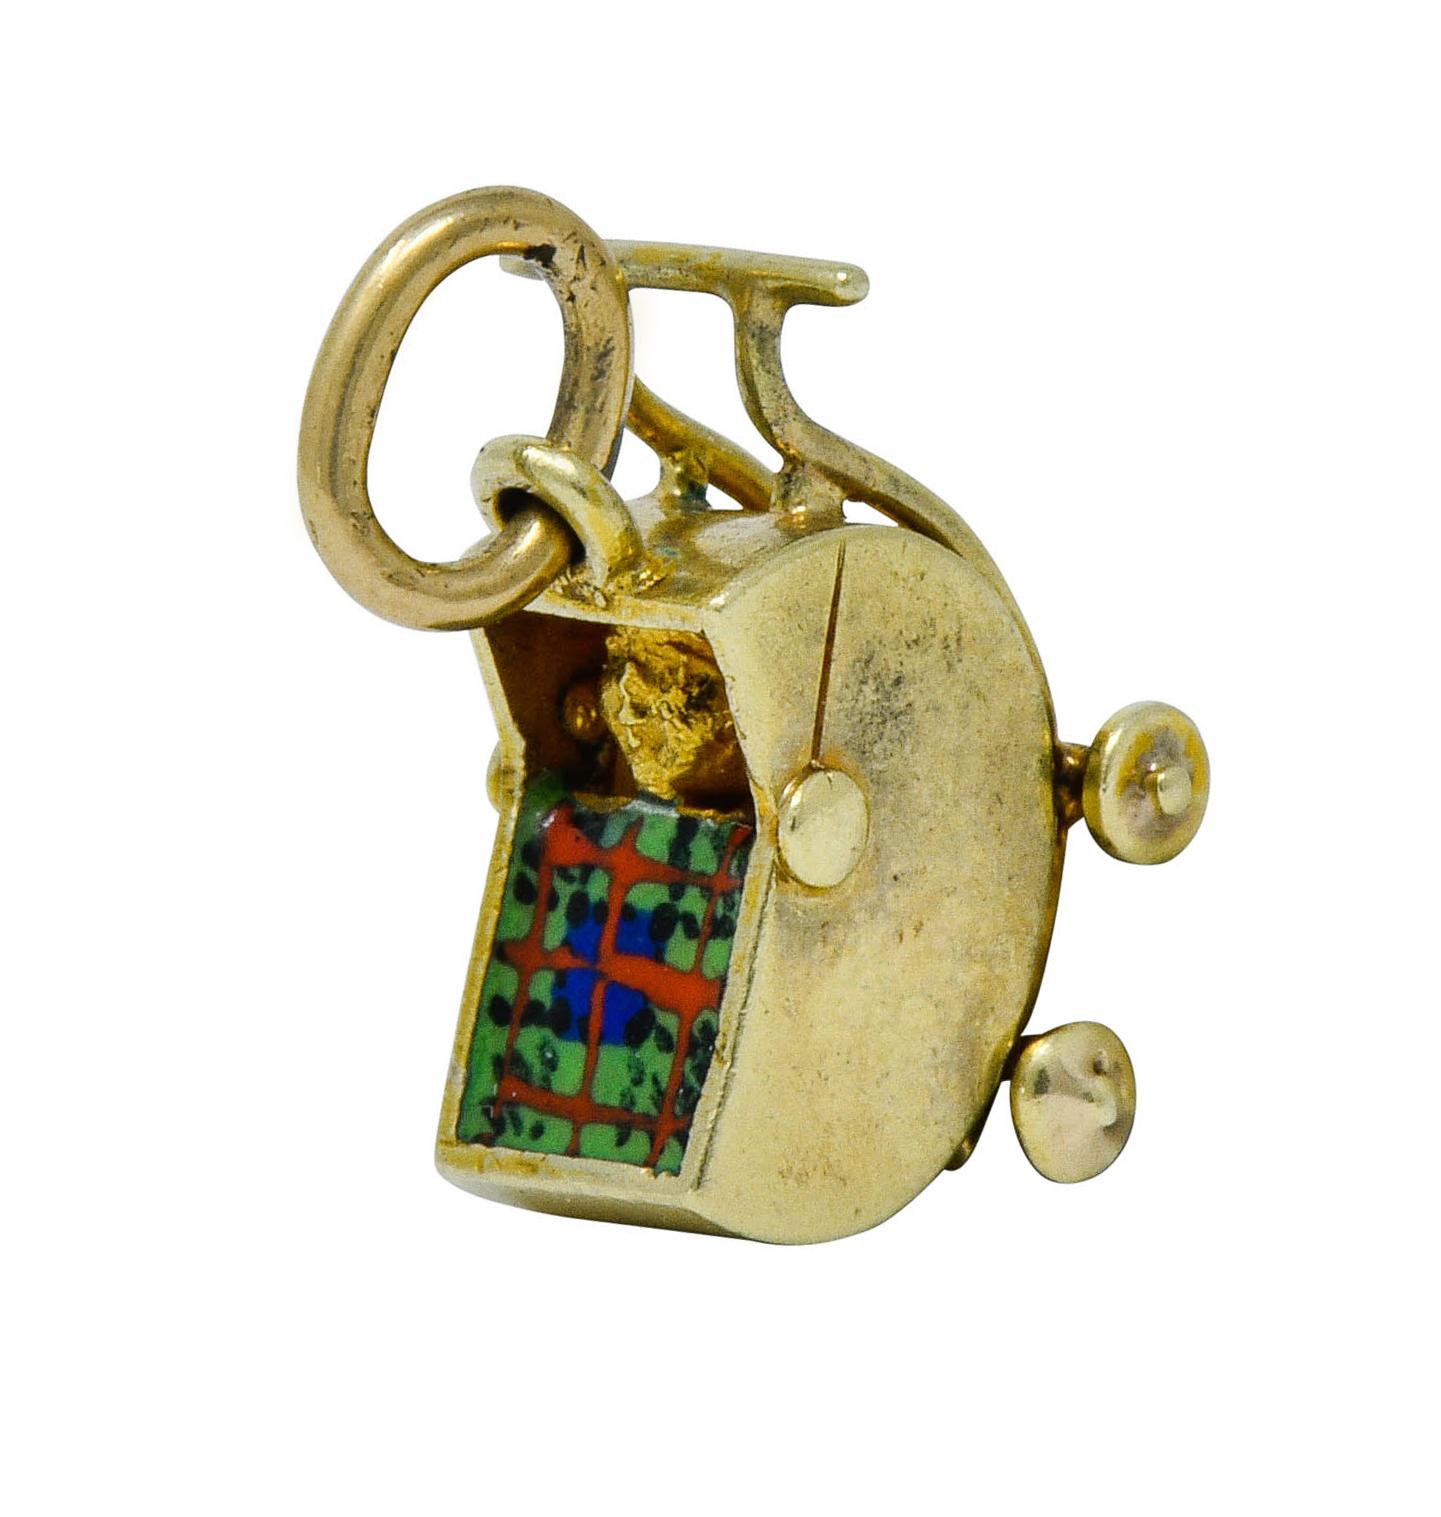 Designed as a pram baby carriage with a highly rendered baby inside

Covered by a colorful plaid blanket comprised of glossy enamel exhibiting very minor loss

Completed by jump ring

Maker's mark for Sloan & Co.

Stamped 14K for 14 karat